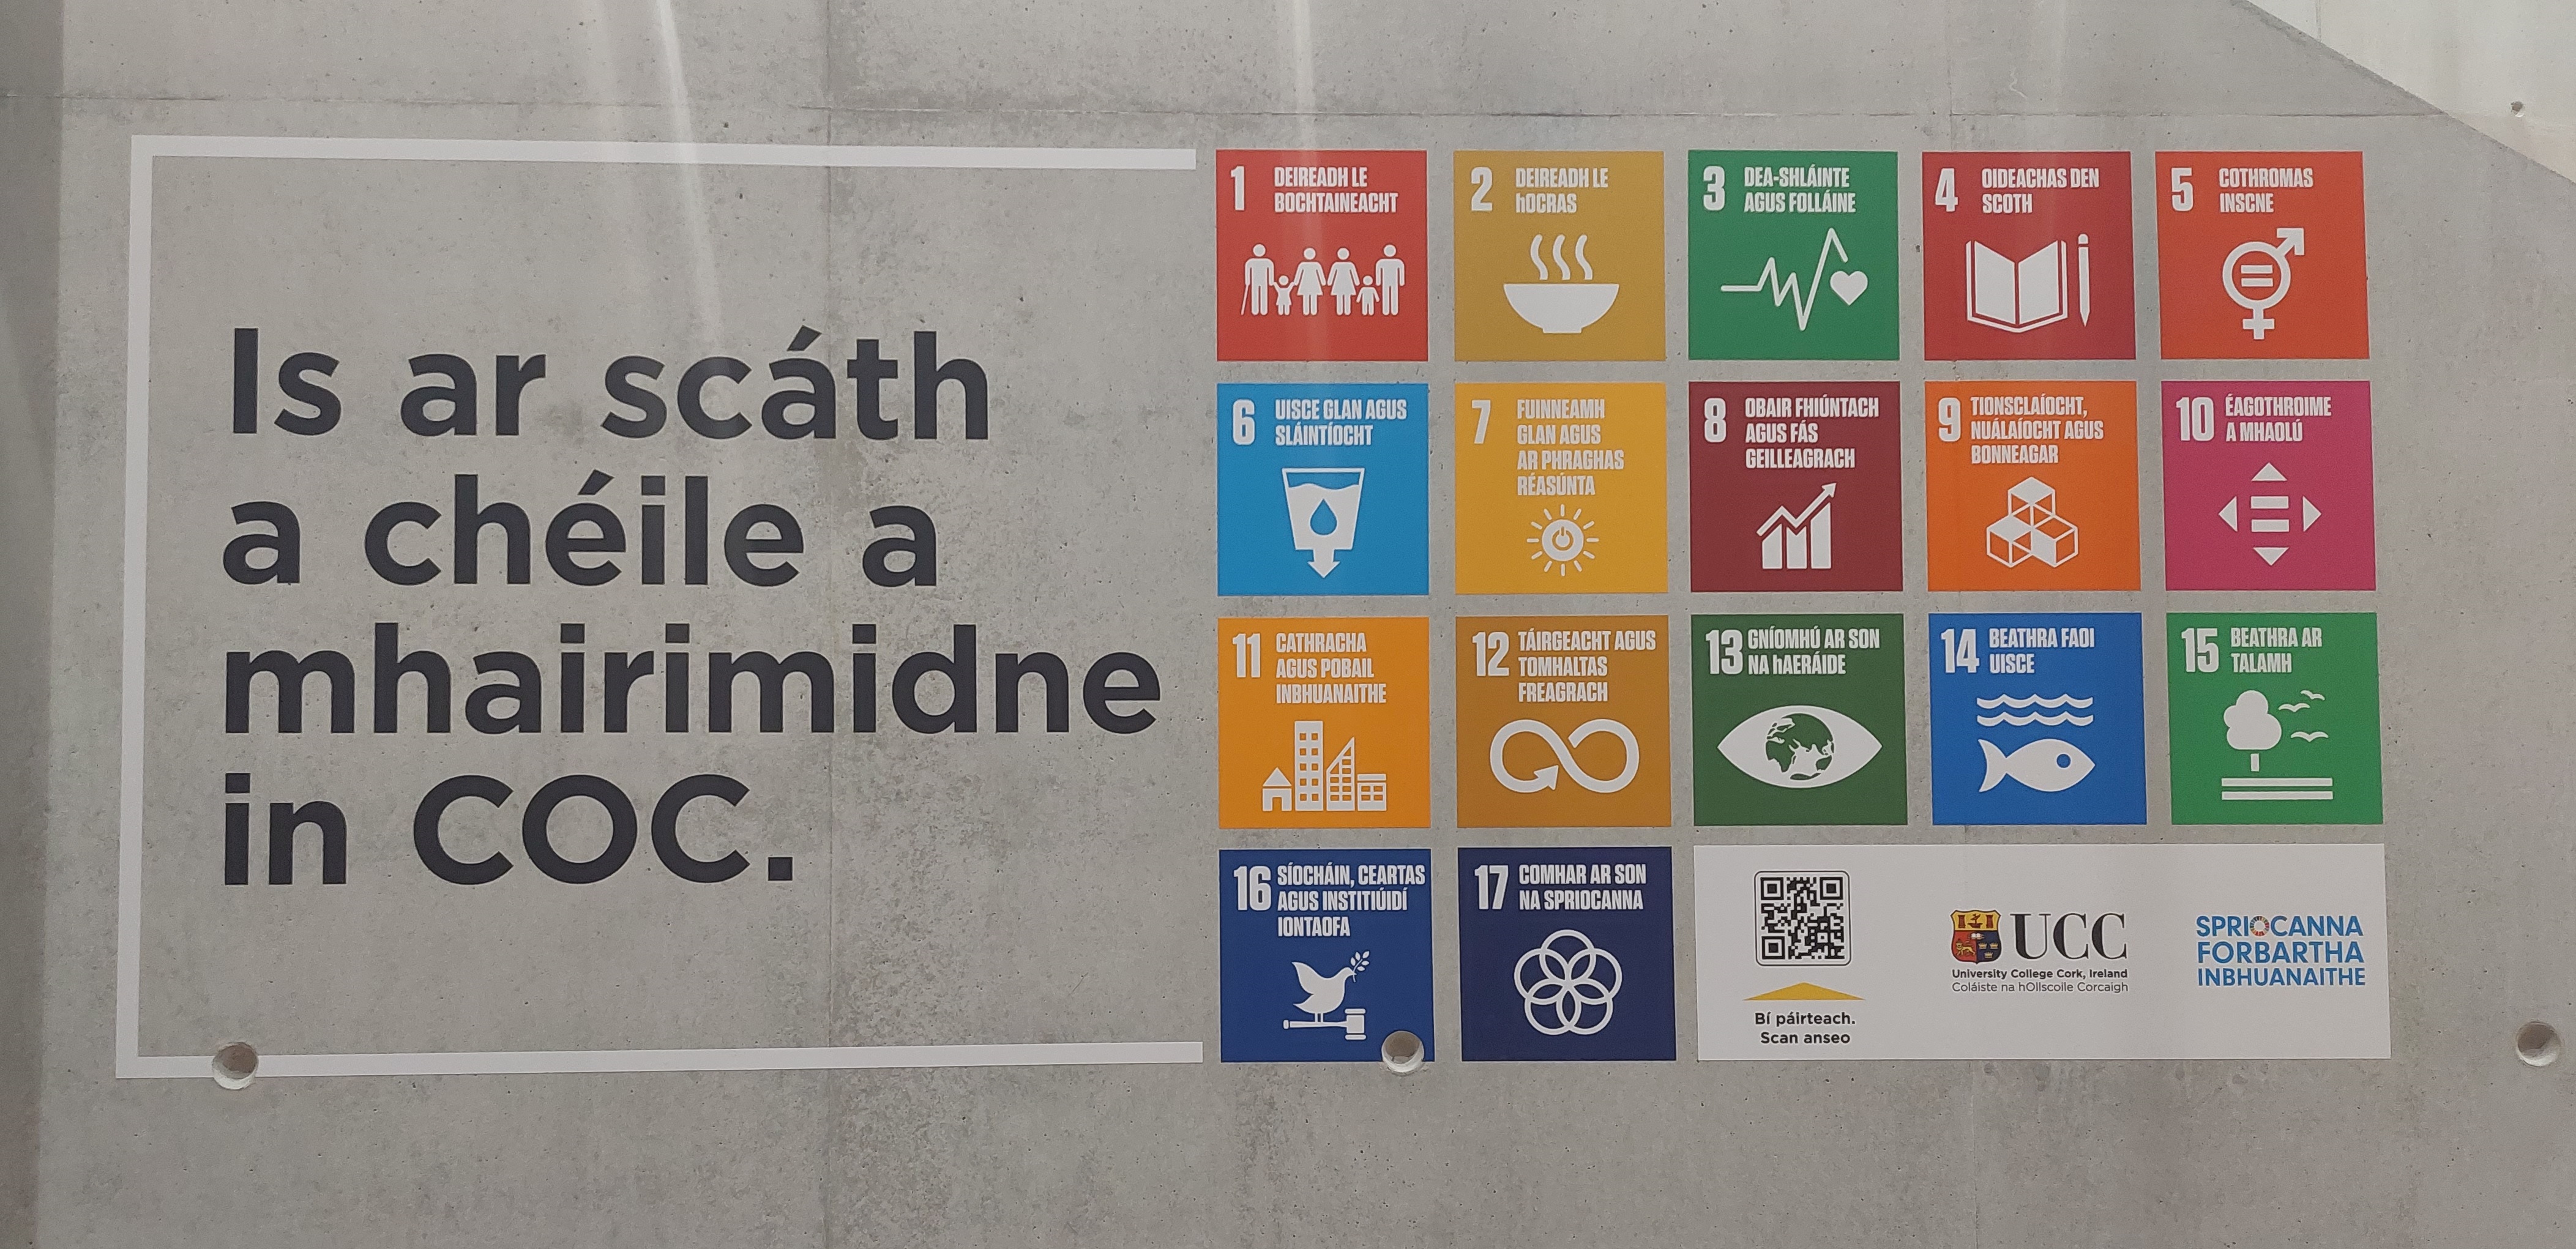 sustainable development goals displayed on campus wall